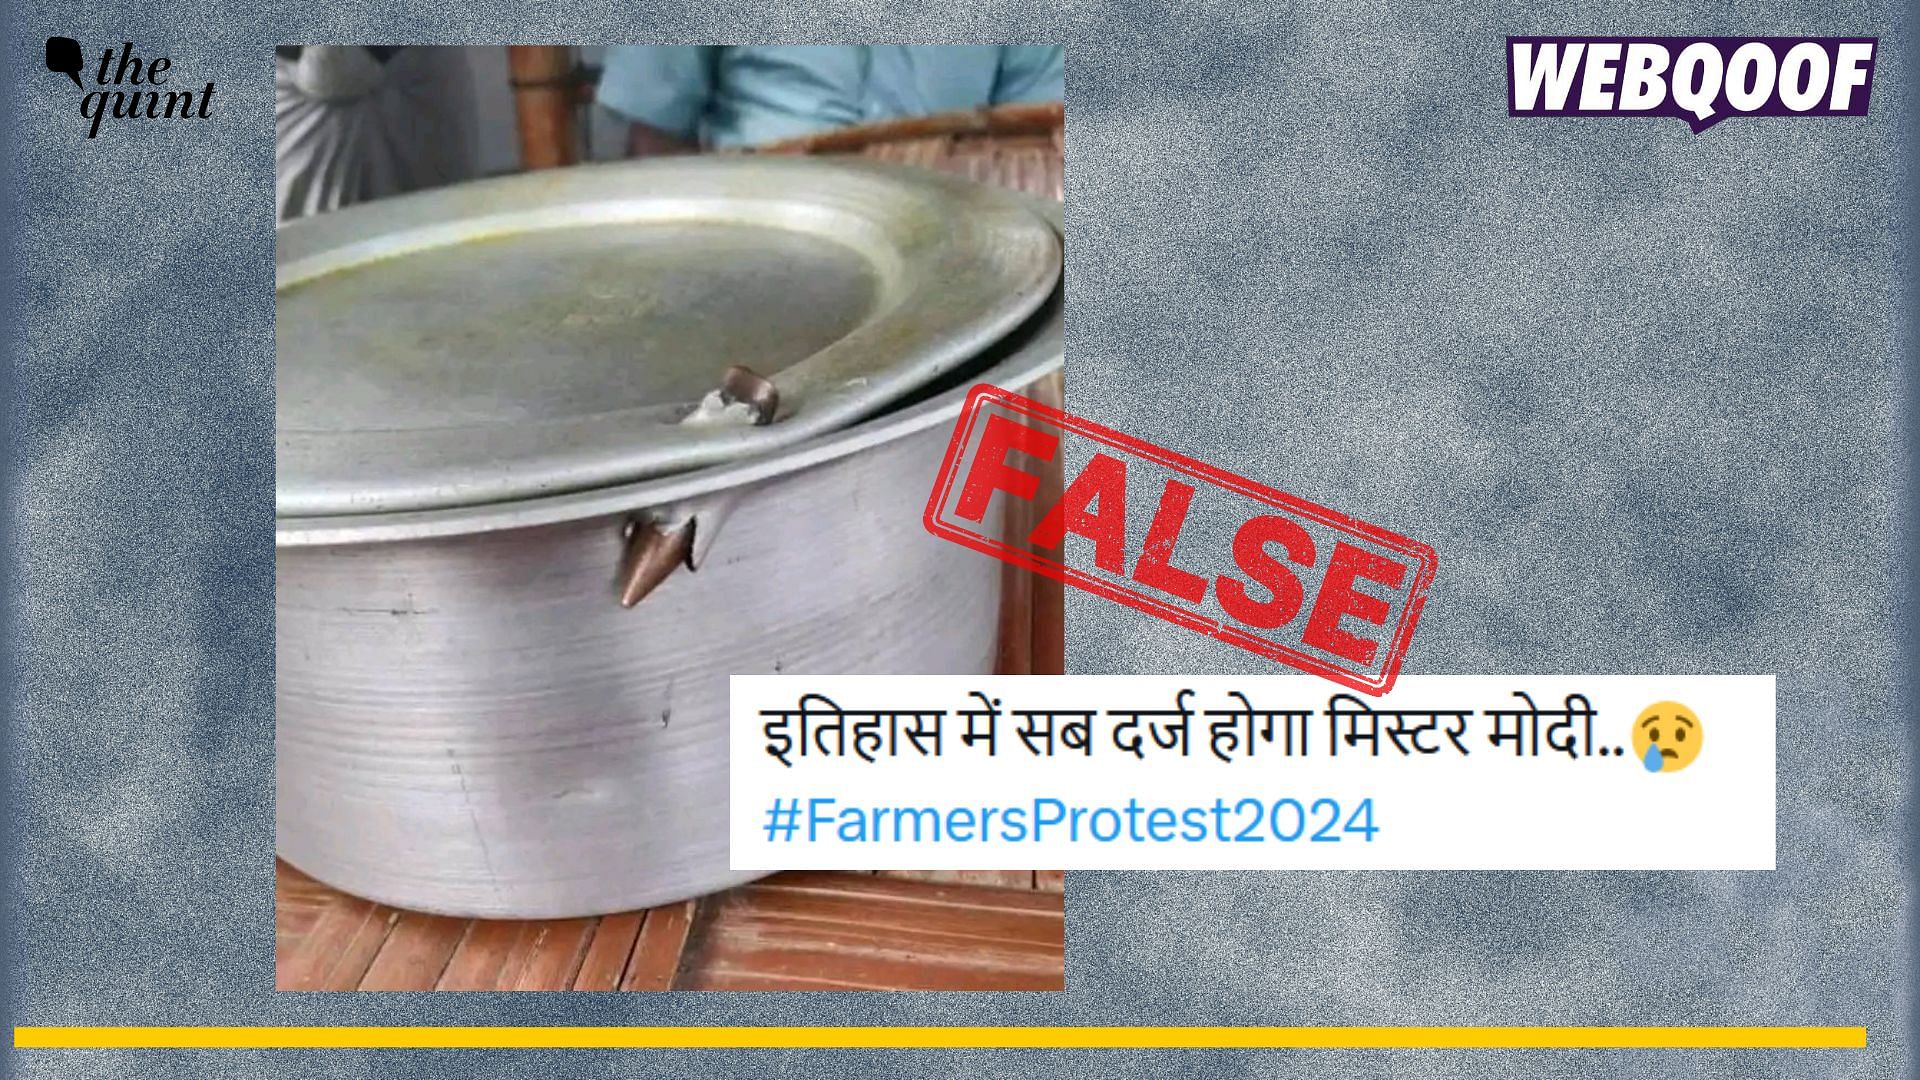 <div class="paragraphs"><p>Fact-check: An unrelated image from Bangladesh showing a bullet piercing a utensil is being linked to the ongoing farmers' protests in India.</p></div>